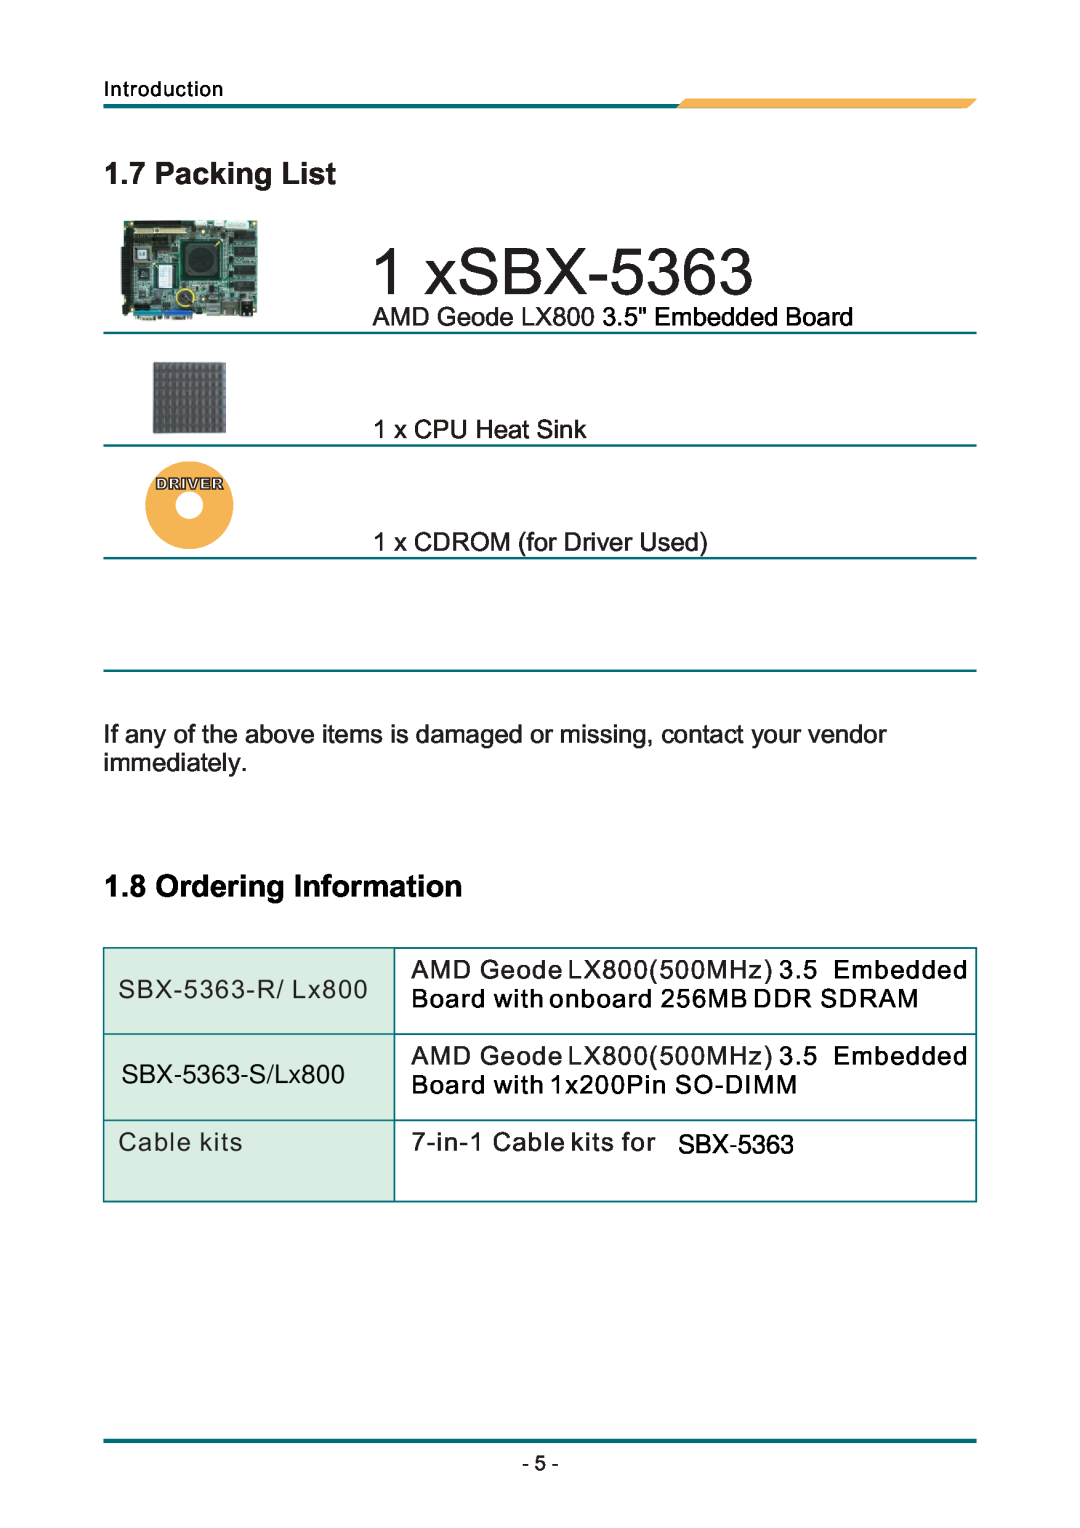 AMD manual Packing List, Ordering Information, xSBX-5363 